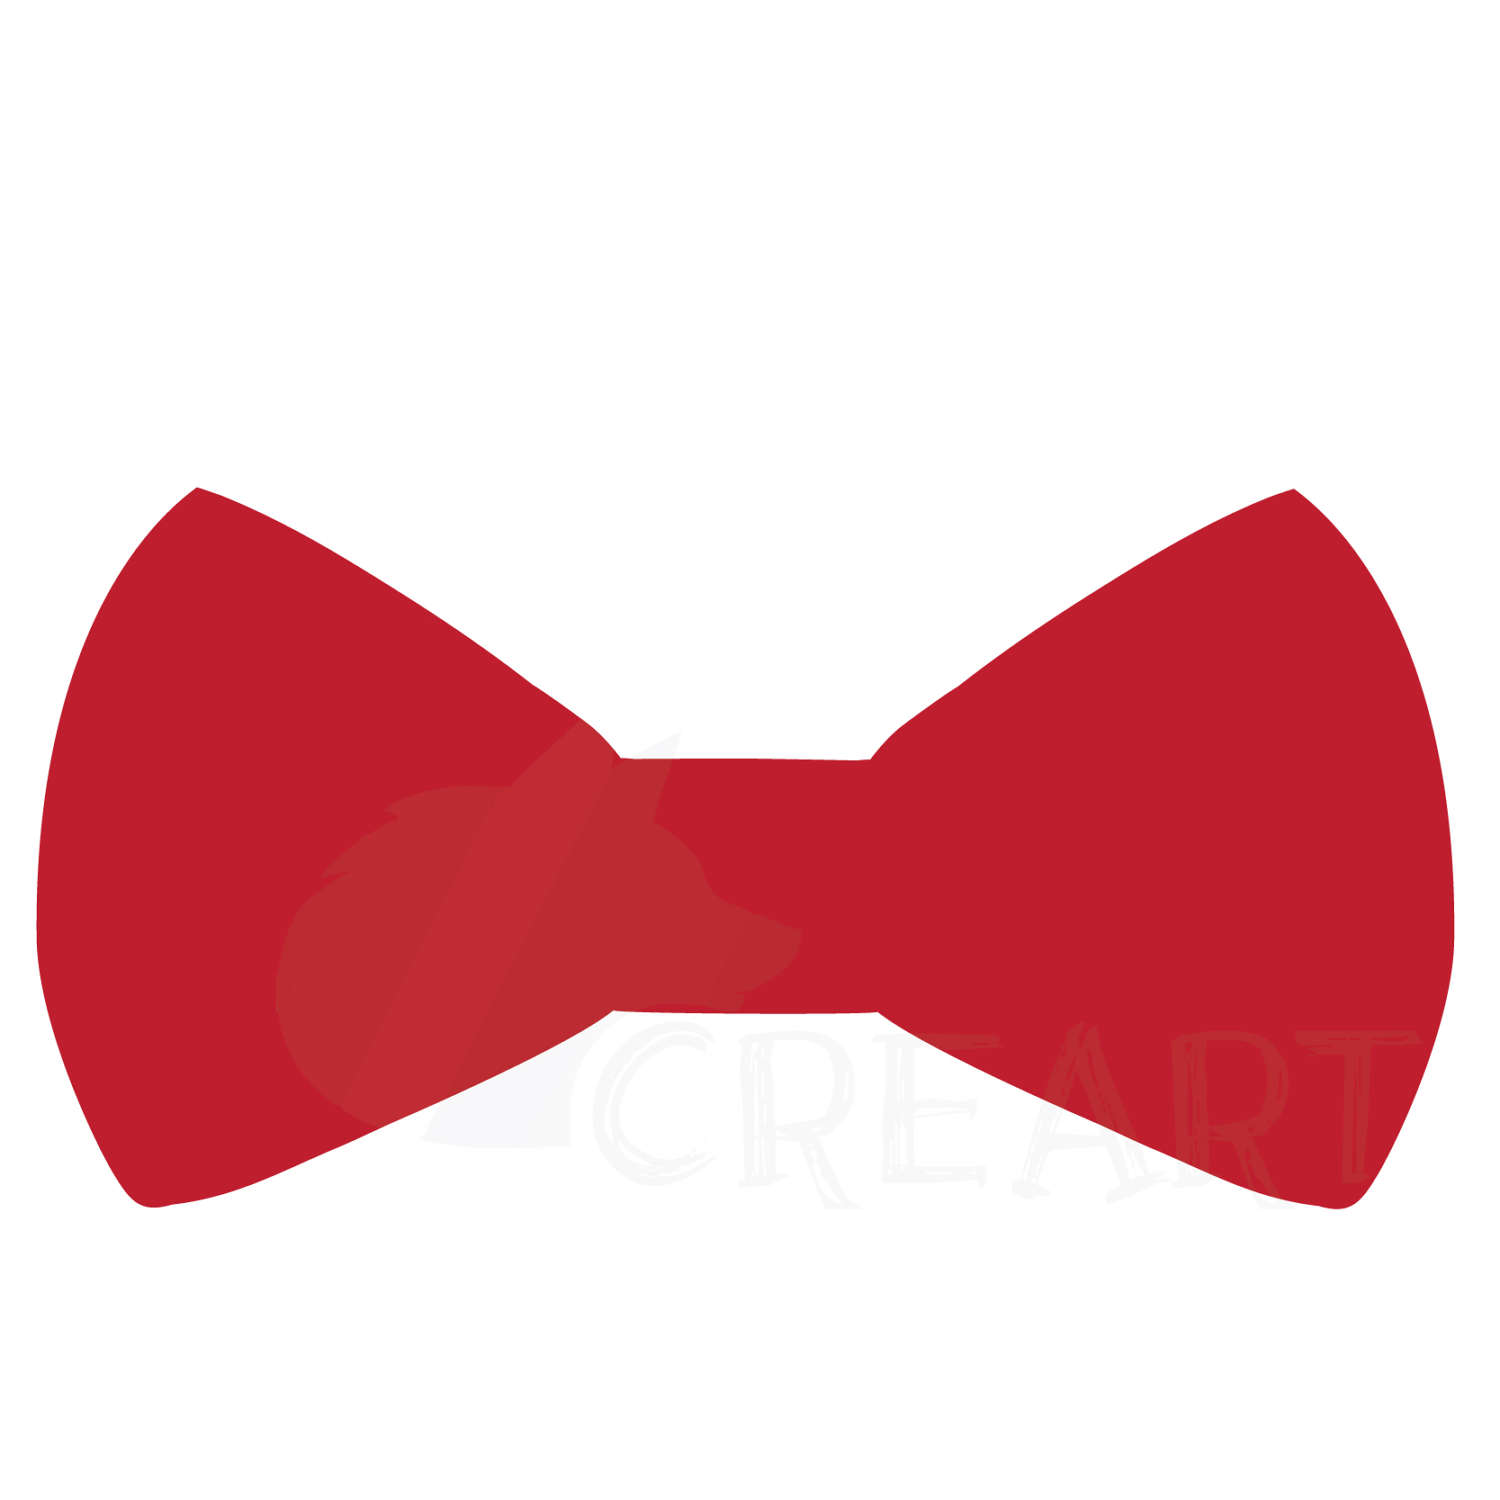 Download Bowtie clipart mickey mouse, Bowtie mickey mouse ...